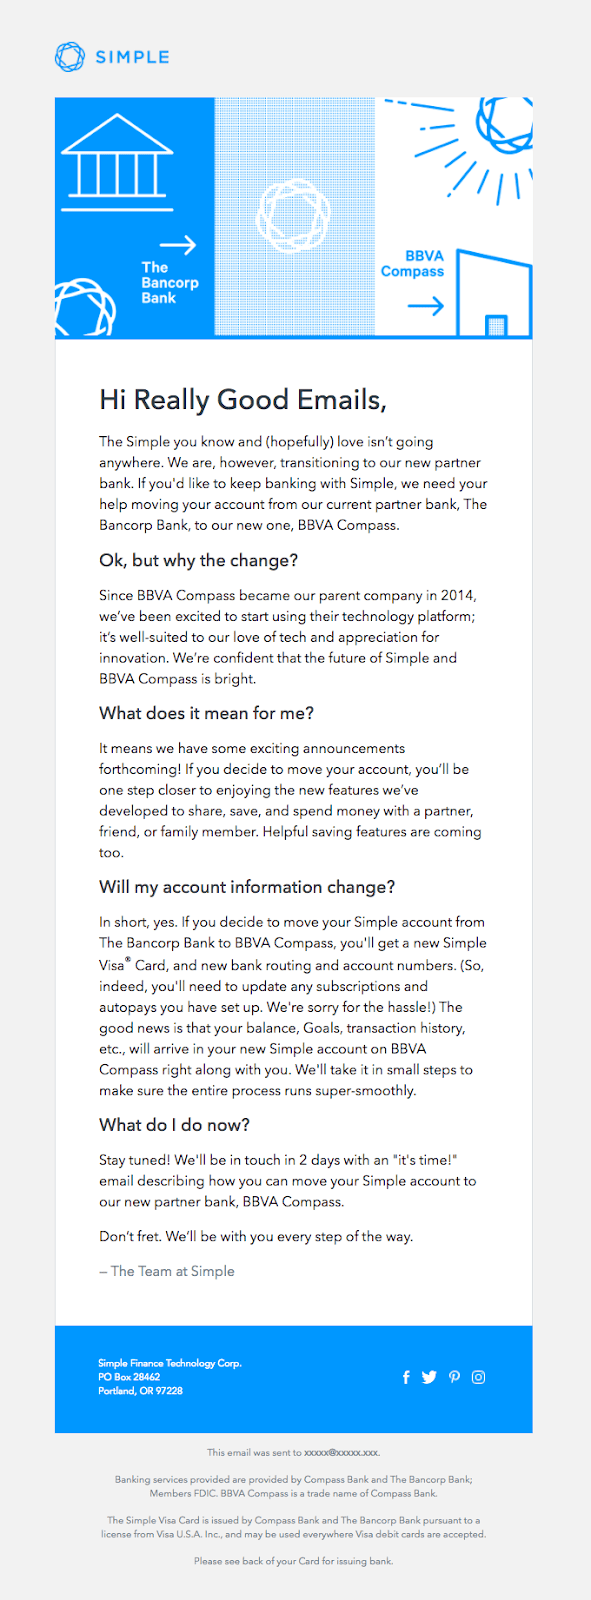 Here’s an example of a brand letting their users know via email about a change to the system that works effectively.